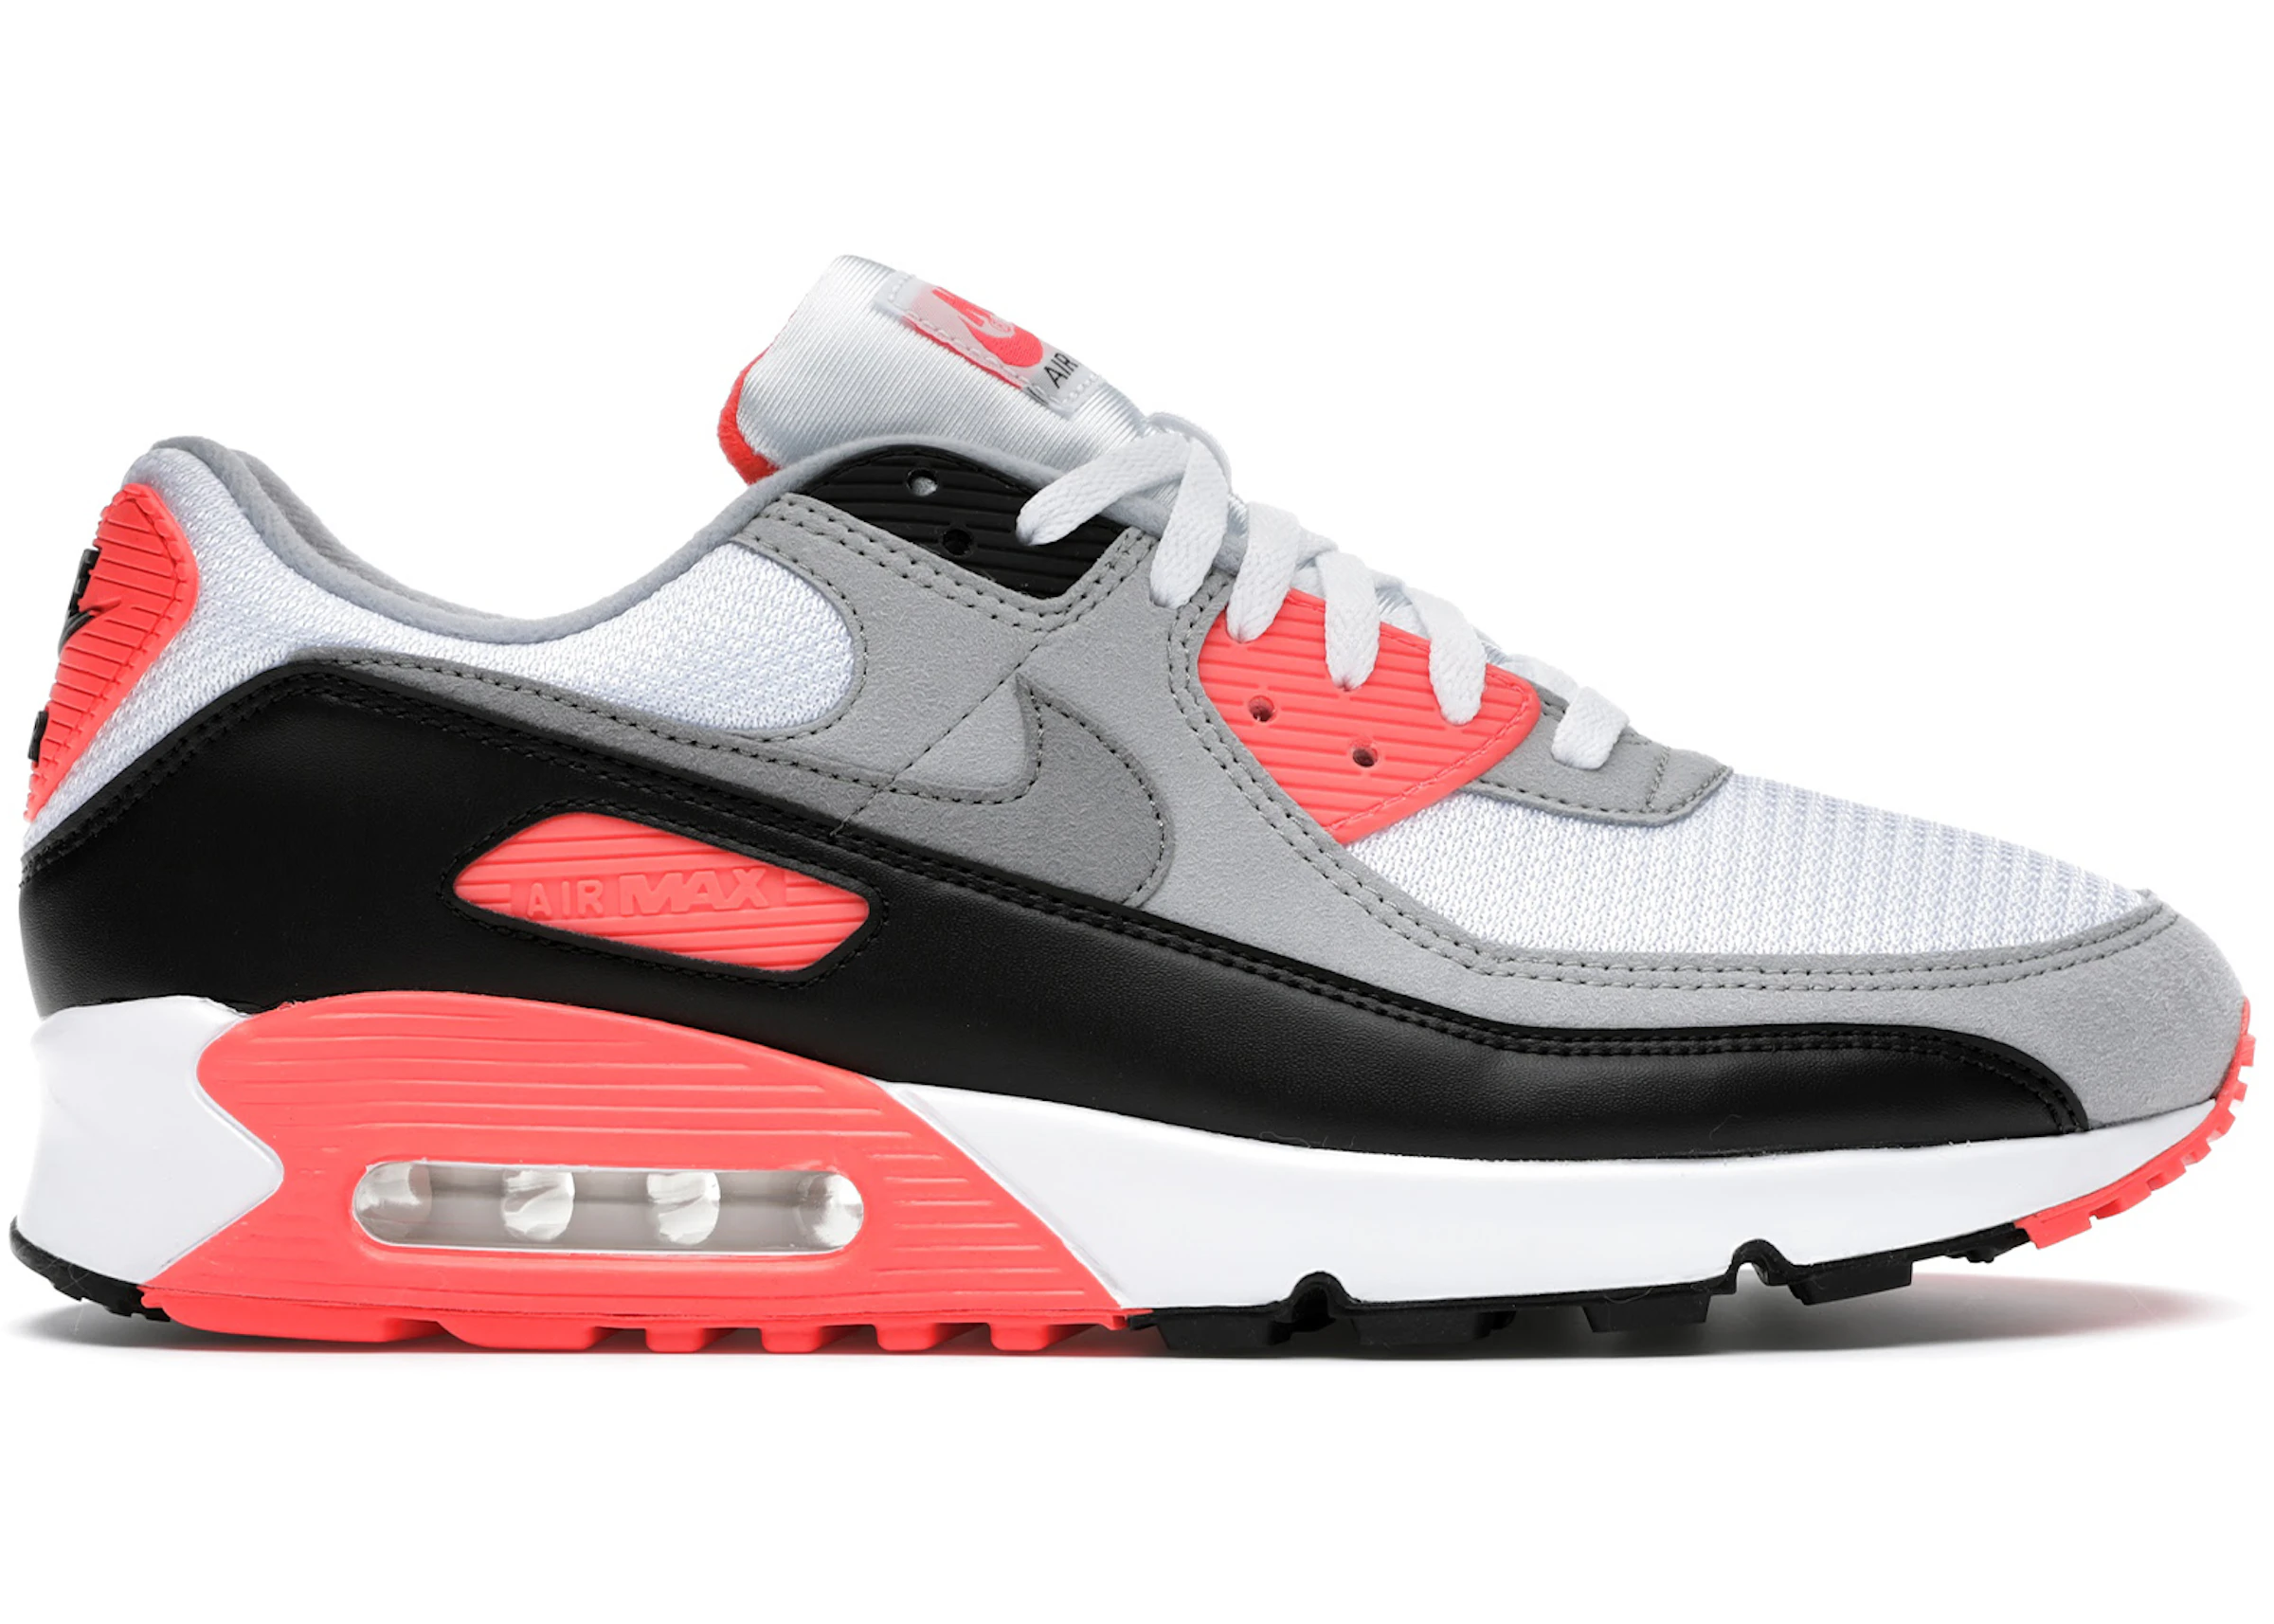 Dwang geeuwen overstroming Nike Air Max 90 Infrared (2020) - CT1685-100 - US